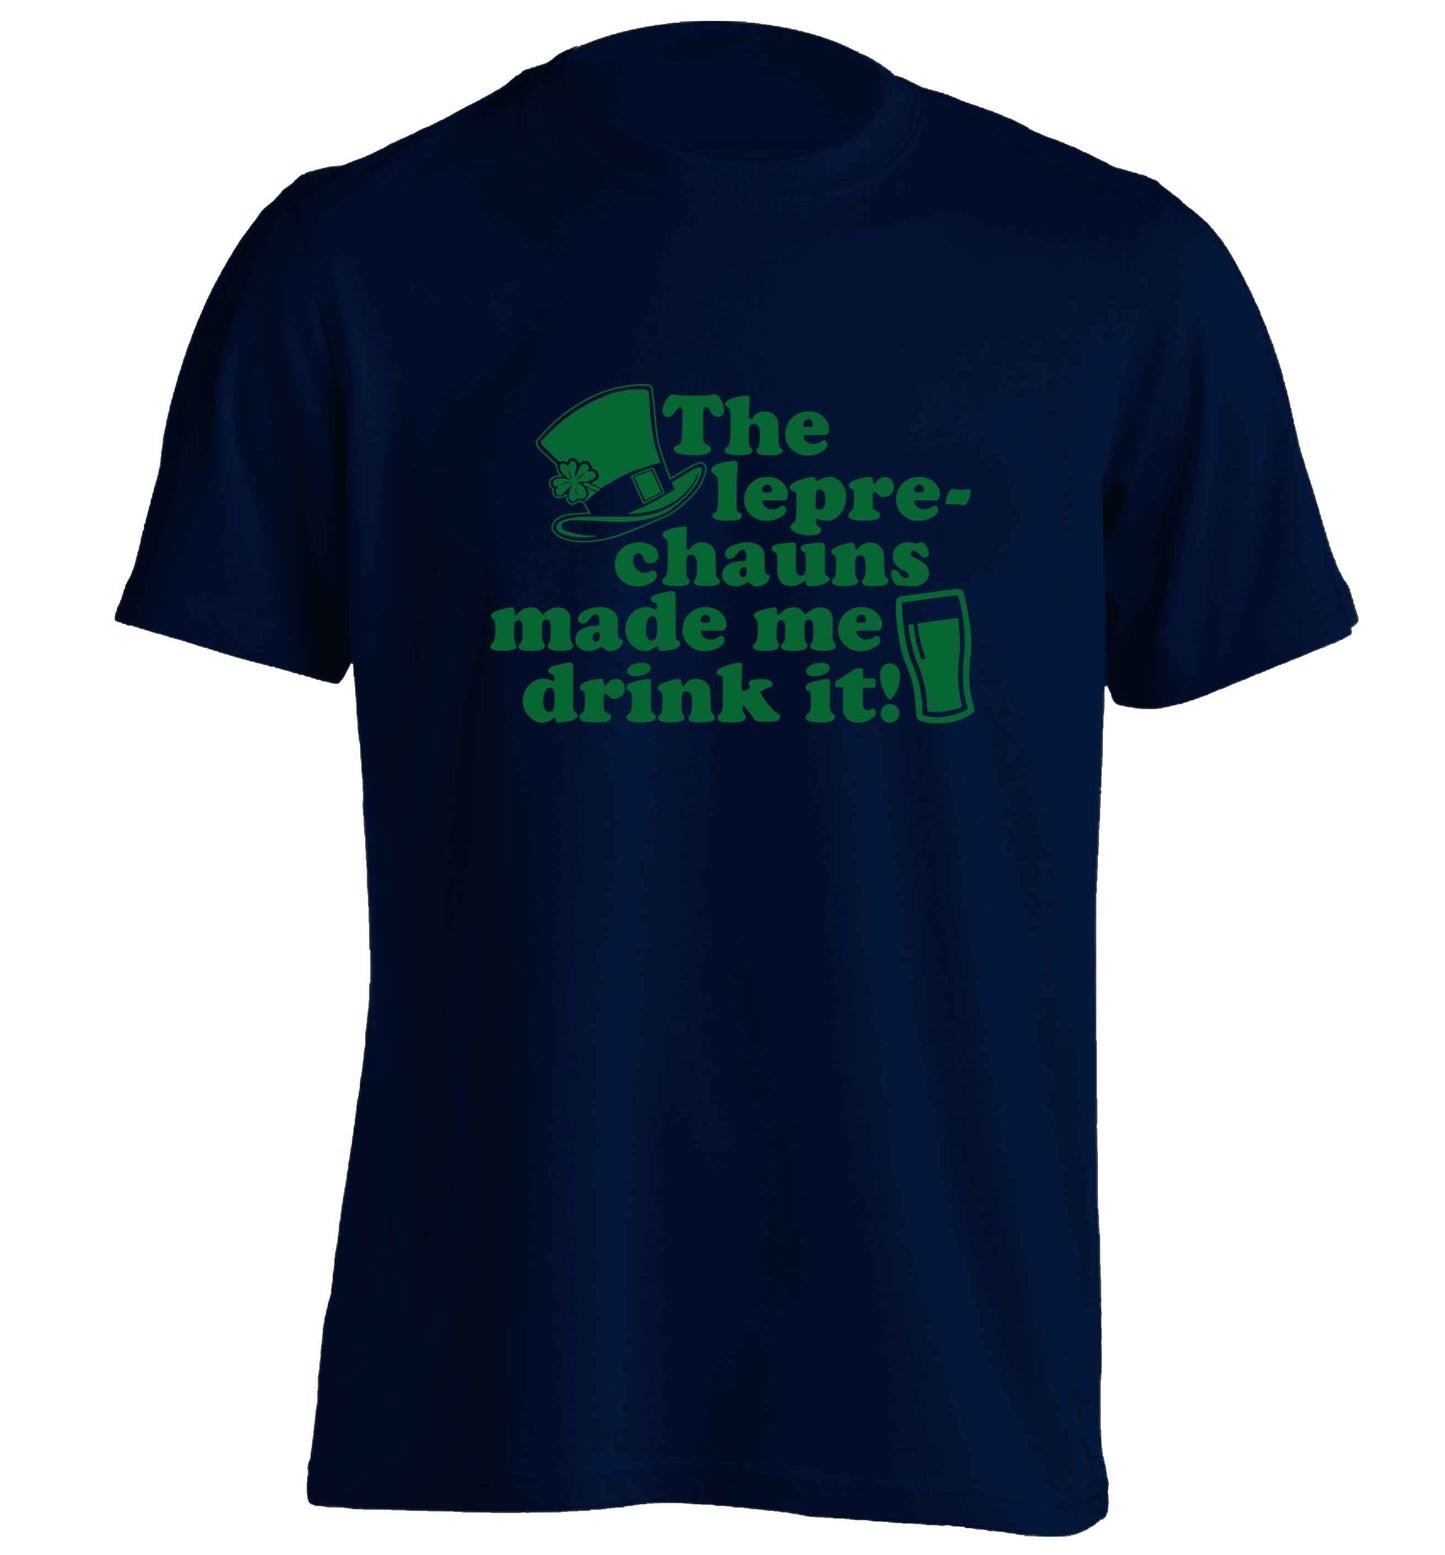 The leprechauns made me drink it adults unisex navy Tshirt 2XL